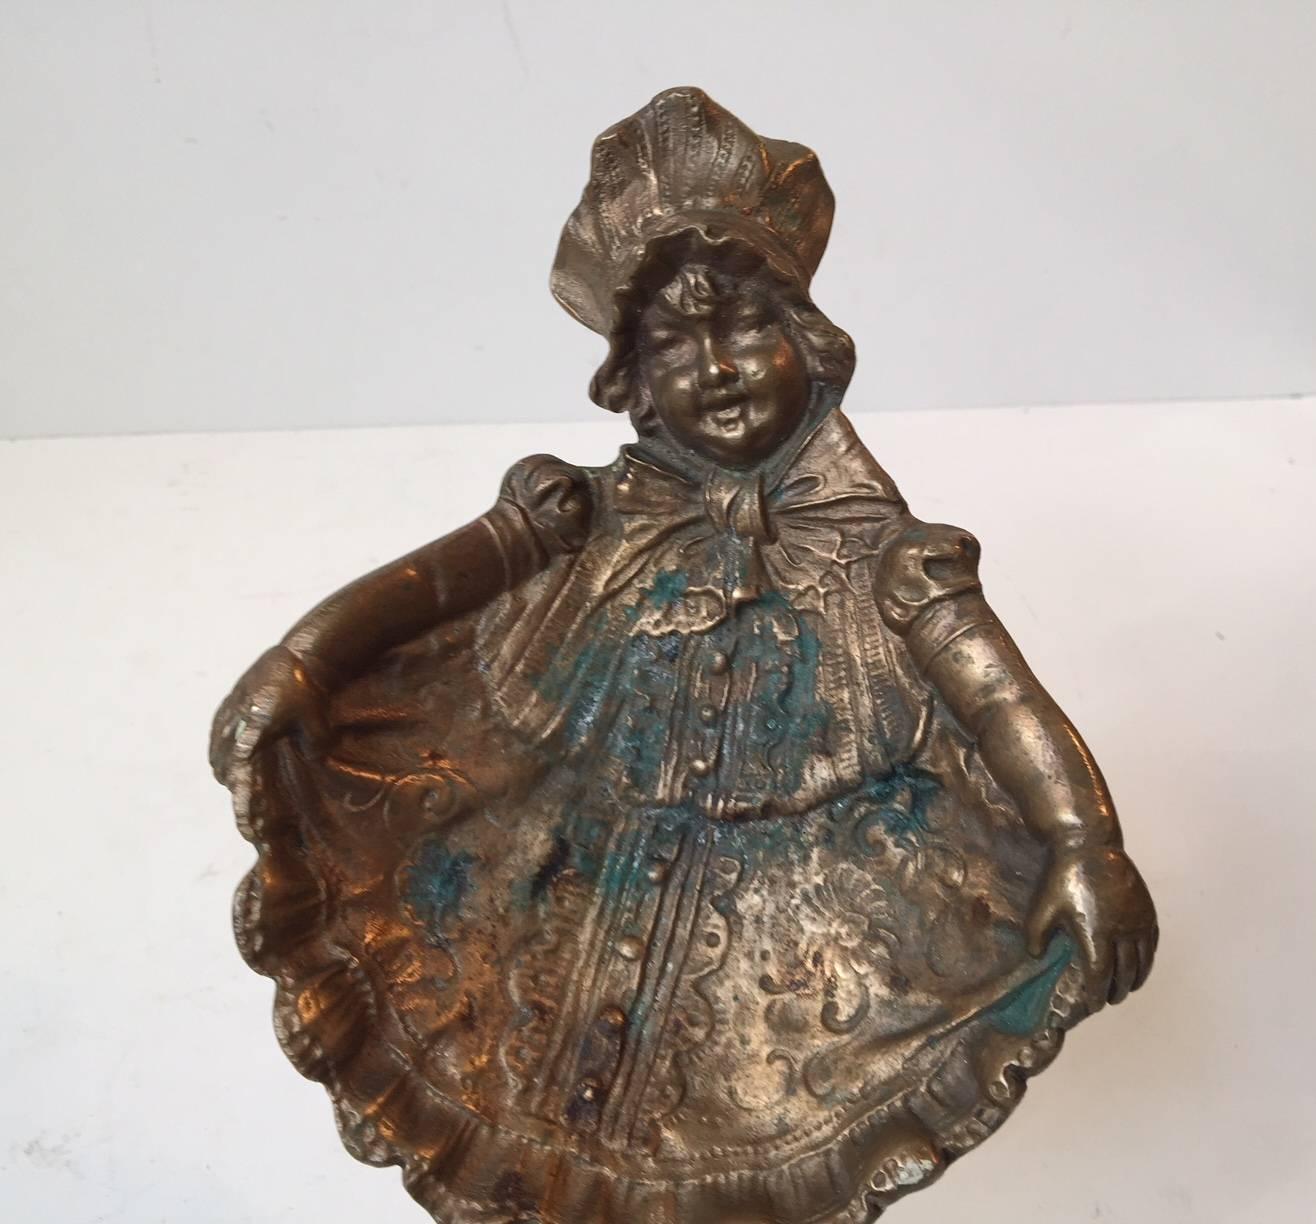 Detailed wall plaque or ashtray in shape of a dressed up little girl. Manufactured in Denmark during the 1920s. Stamped - Bronce to the backside.